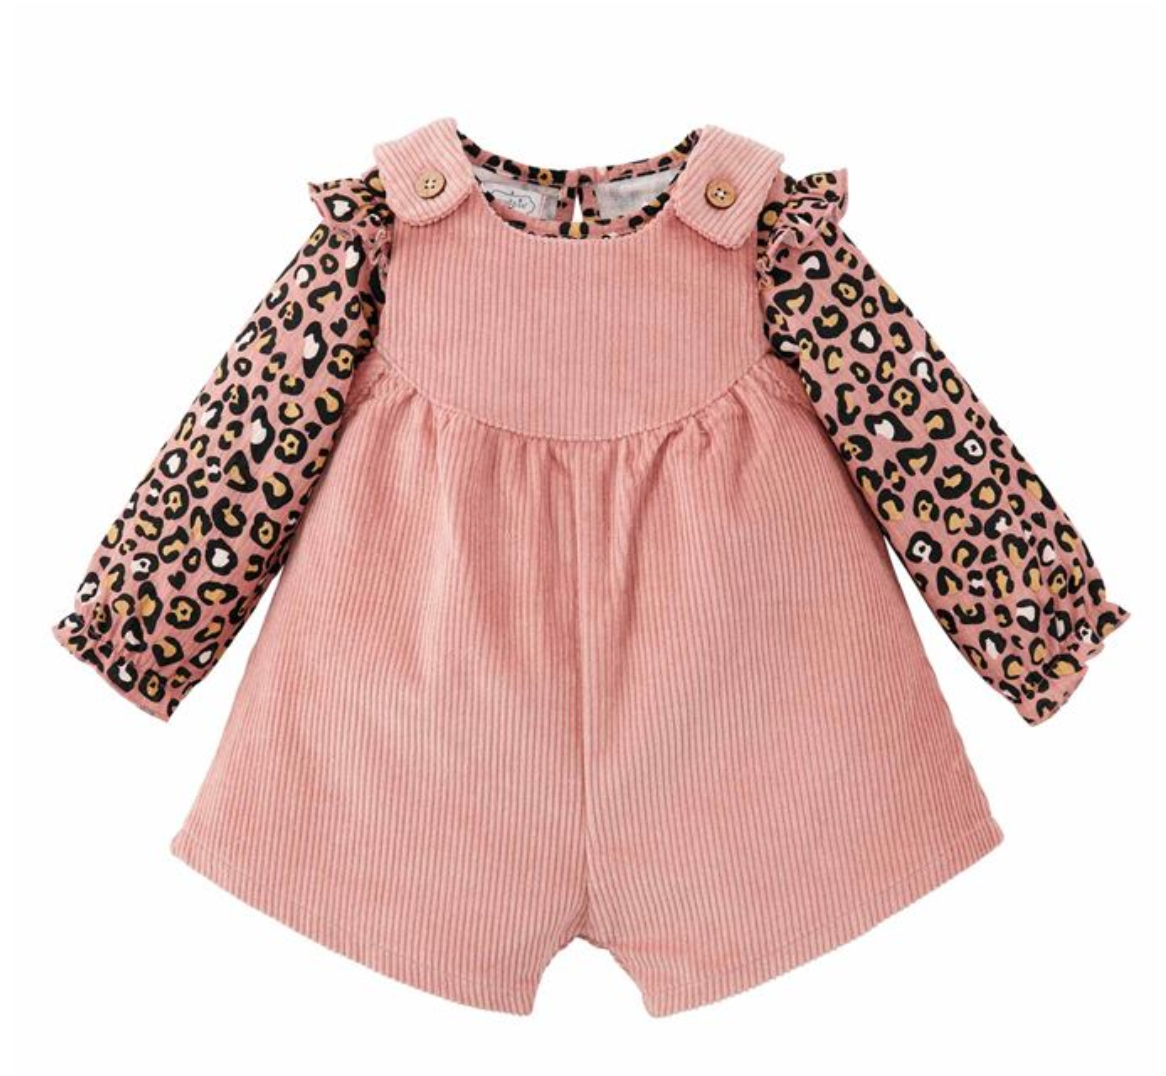 Baby Leopard Overall Short Set